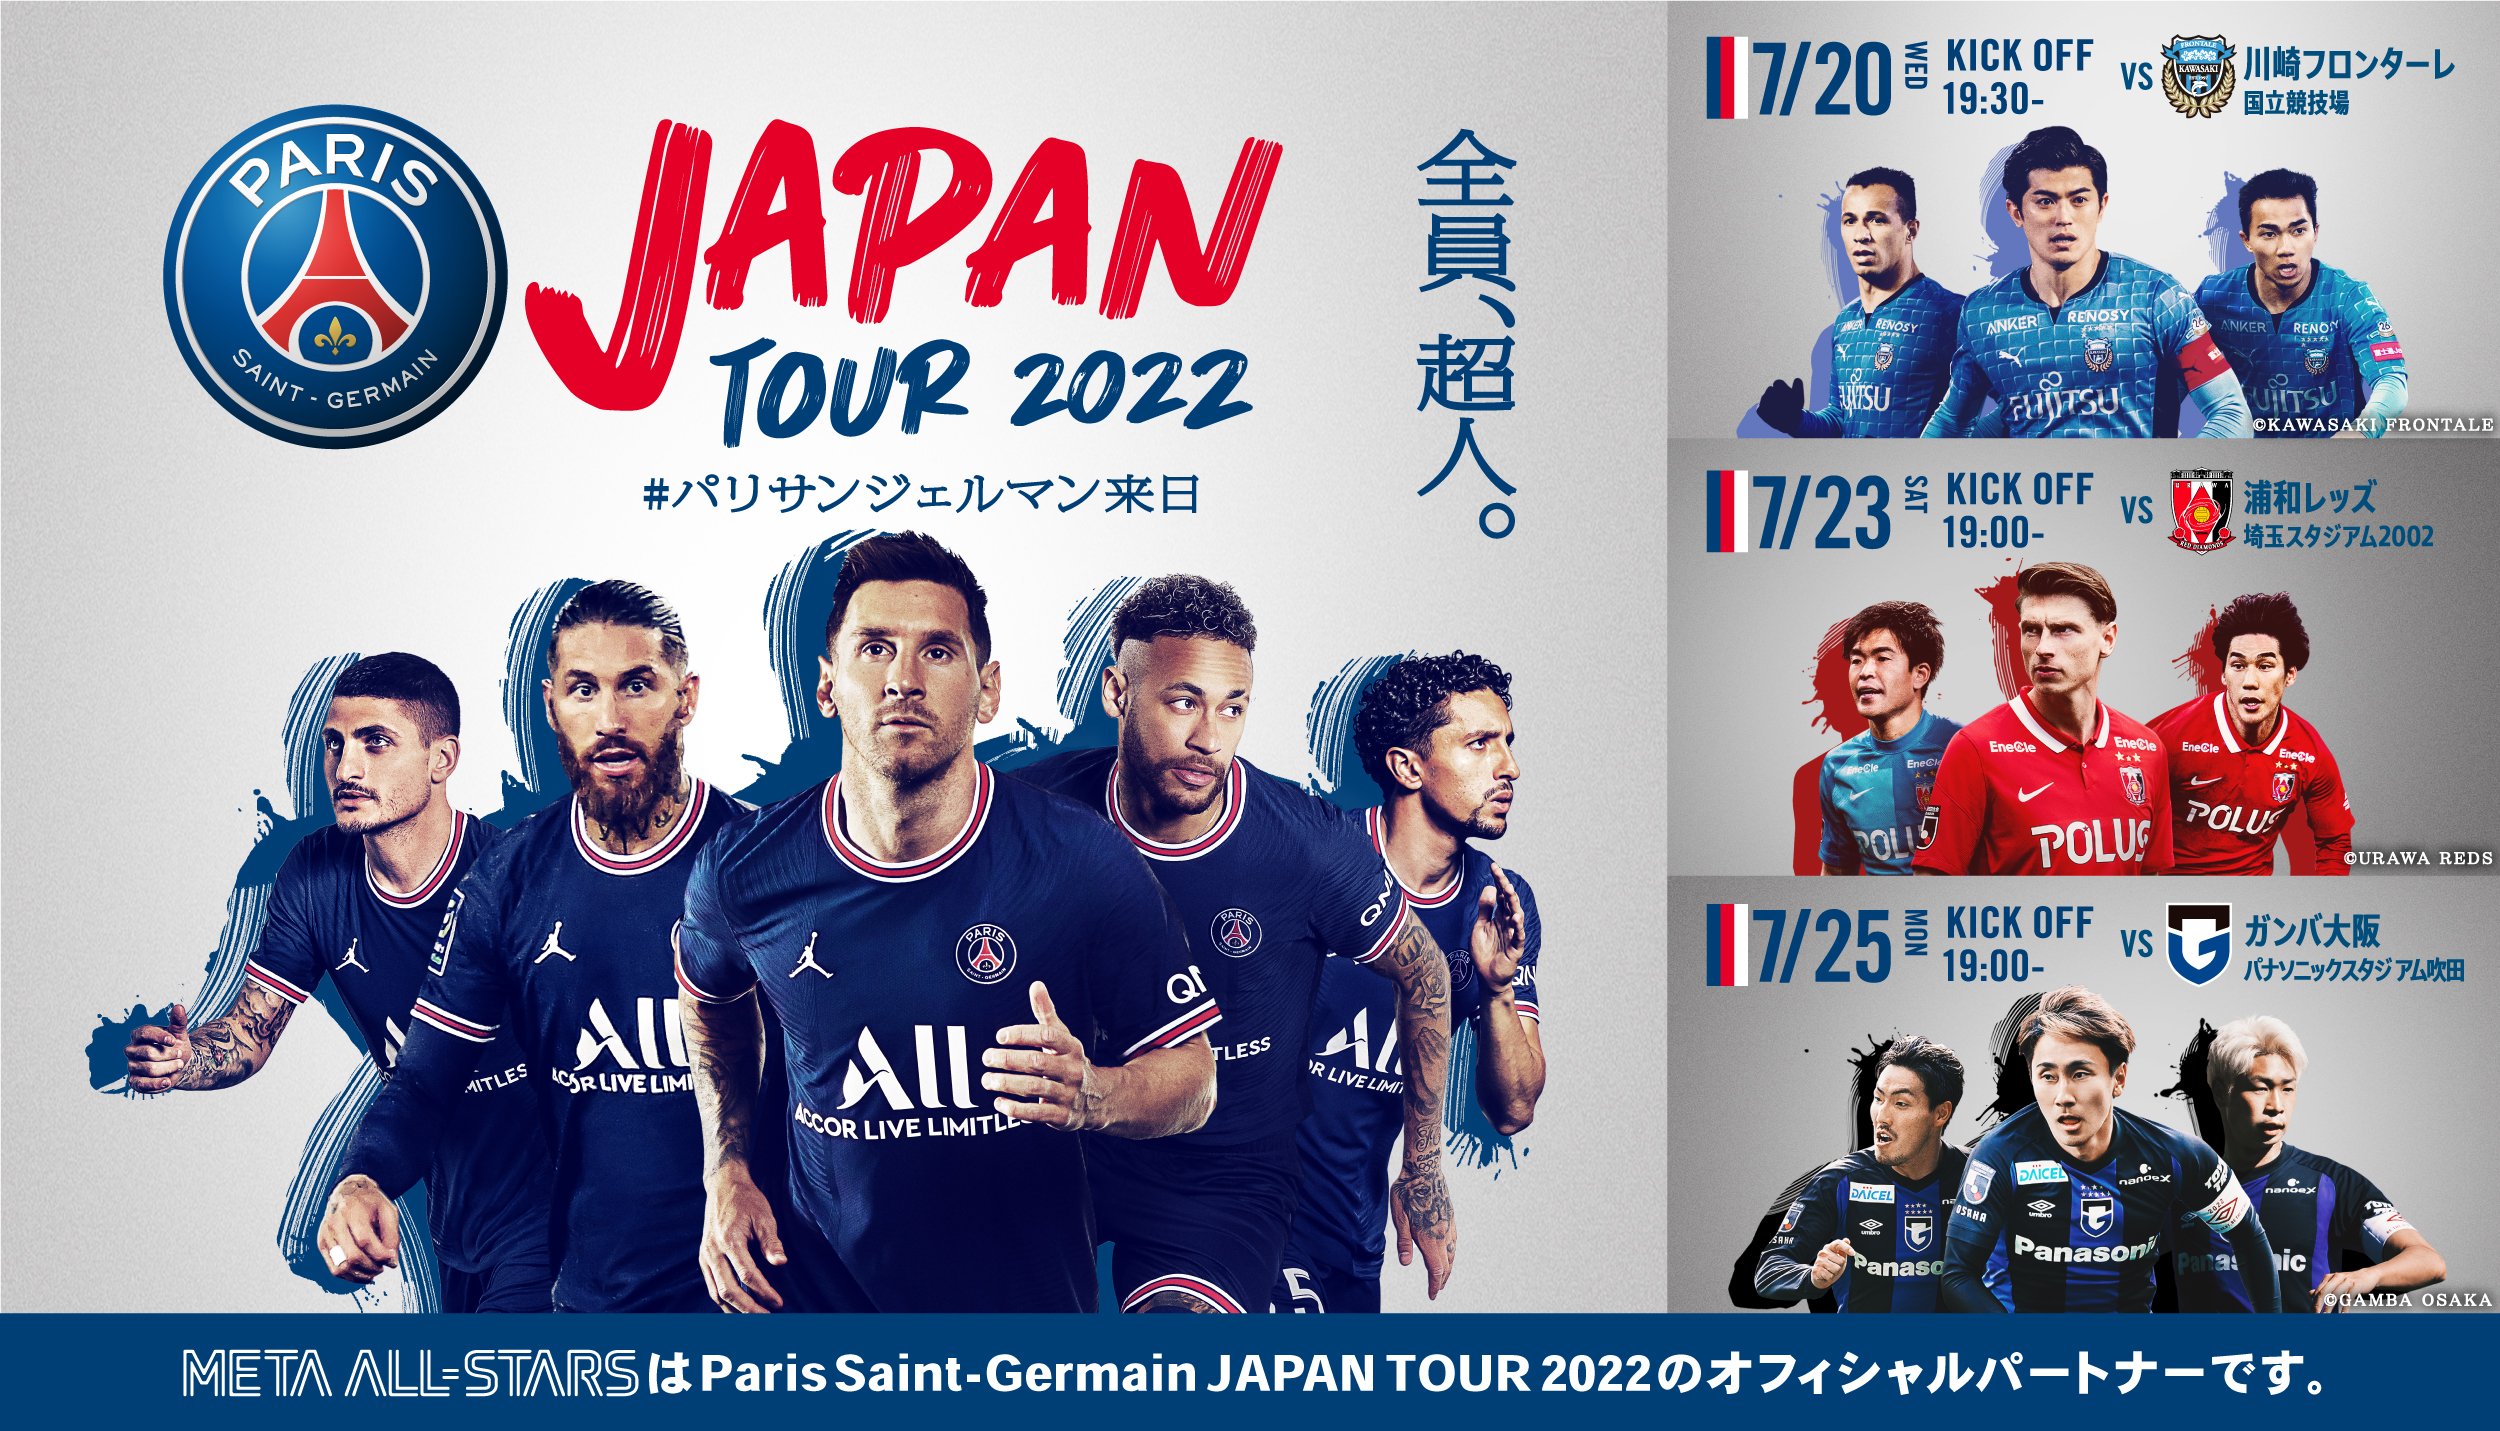 META ALL-STARS" is now the Official Partner of Paris JAPAN TOUR 2022 | JAPAN TOUR 2022 Official Site